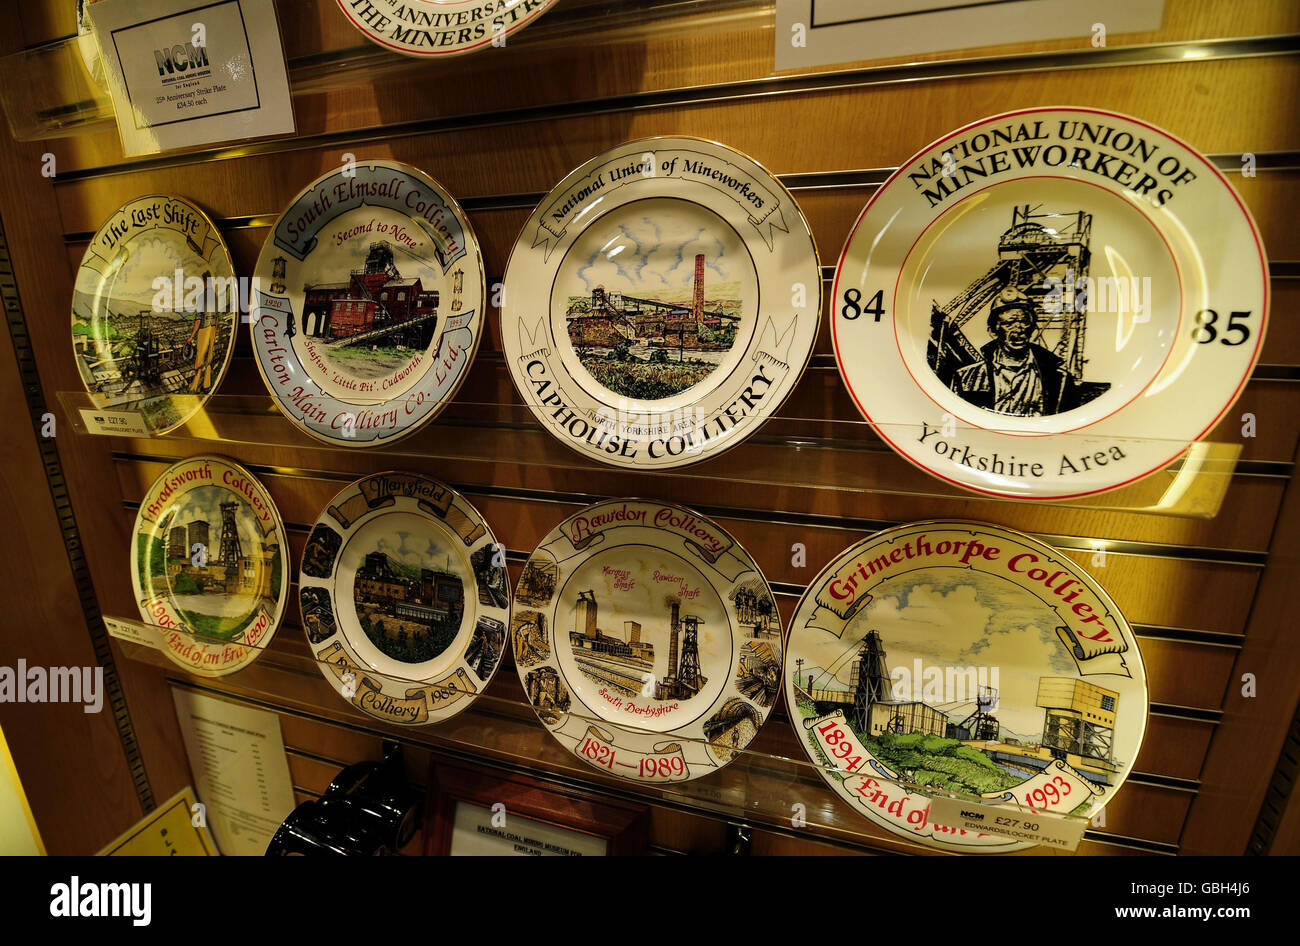 Commemorative plates of Coal Mining history, for sale at the National Mining Museum at Caphouse Colliery near Wakefield. A new plate commemorating the 25th Anniversary of the Miners Strike which began this month 25 years ago (top right) stands among others showing Pits that closed following the year long dispute. Stock Photo